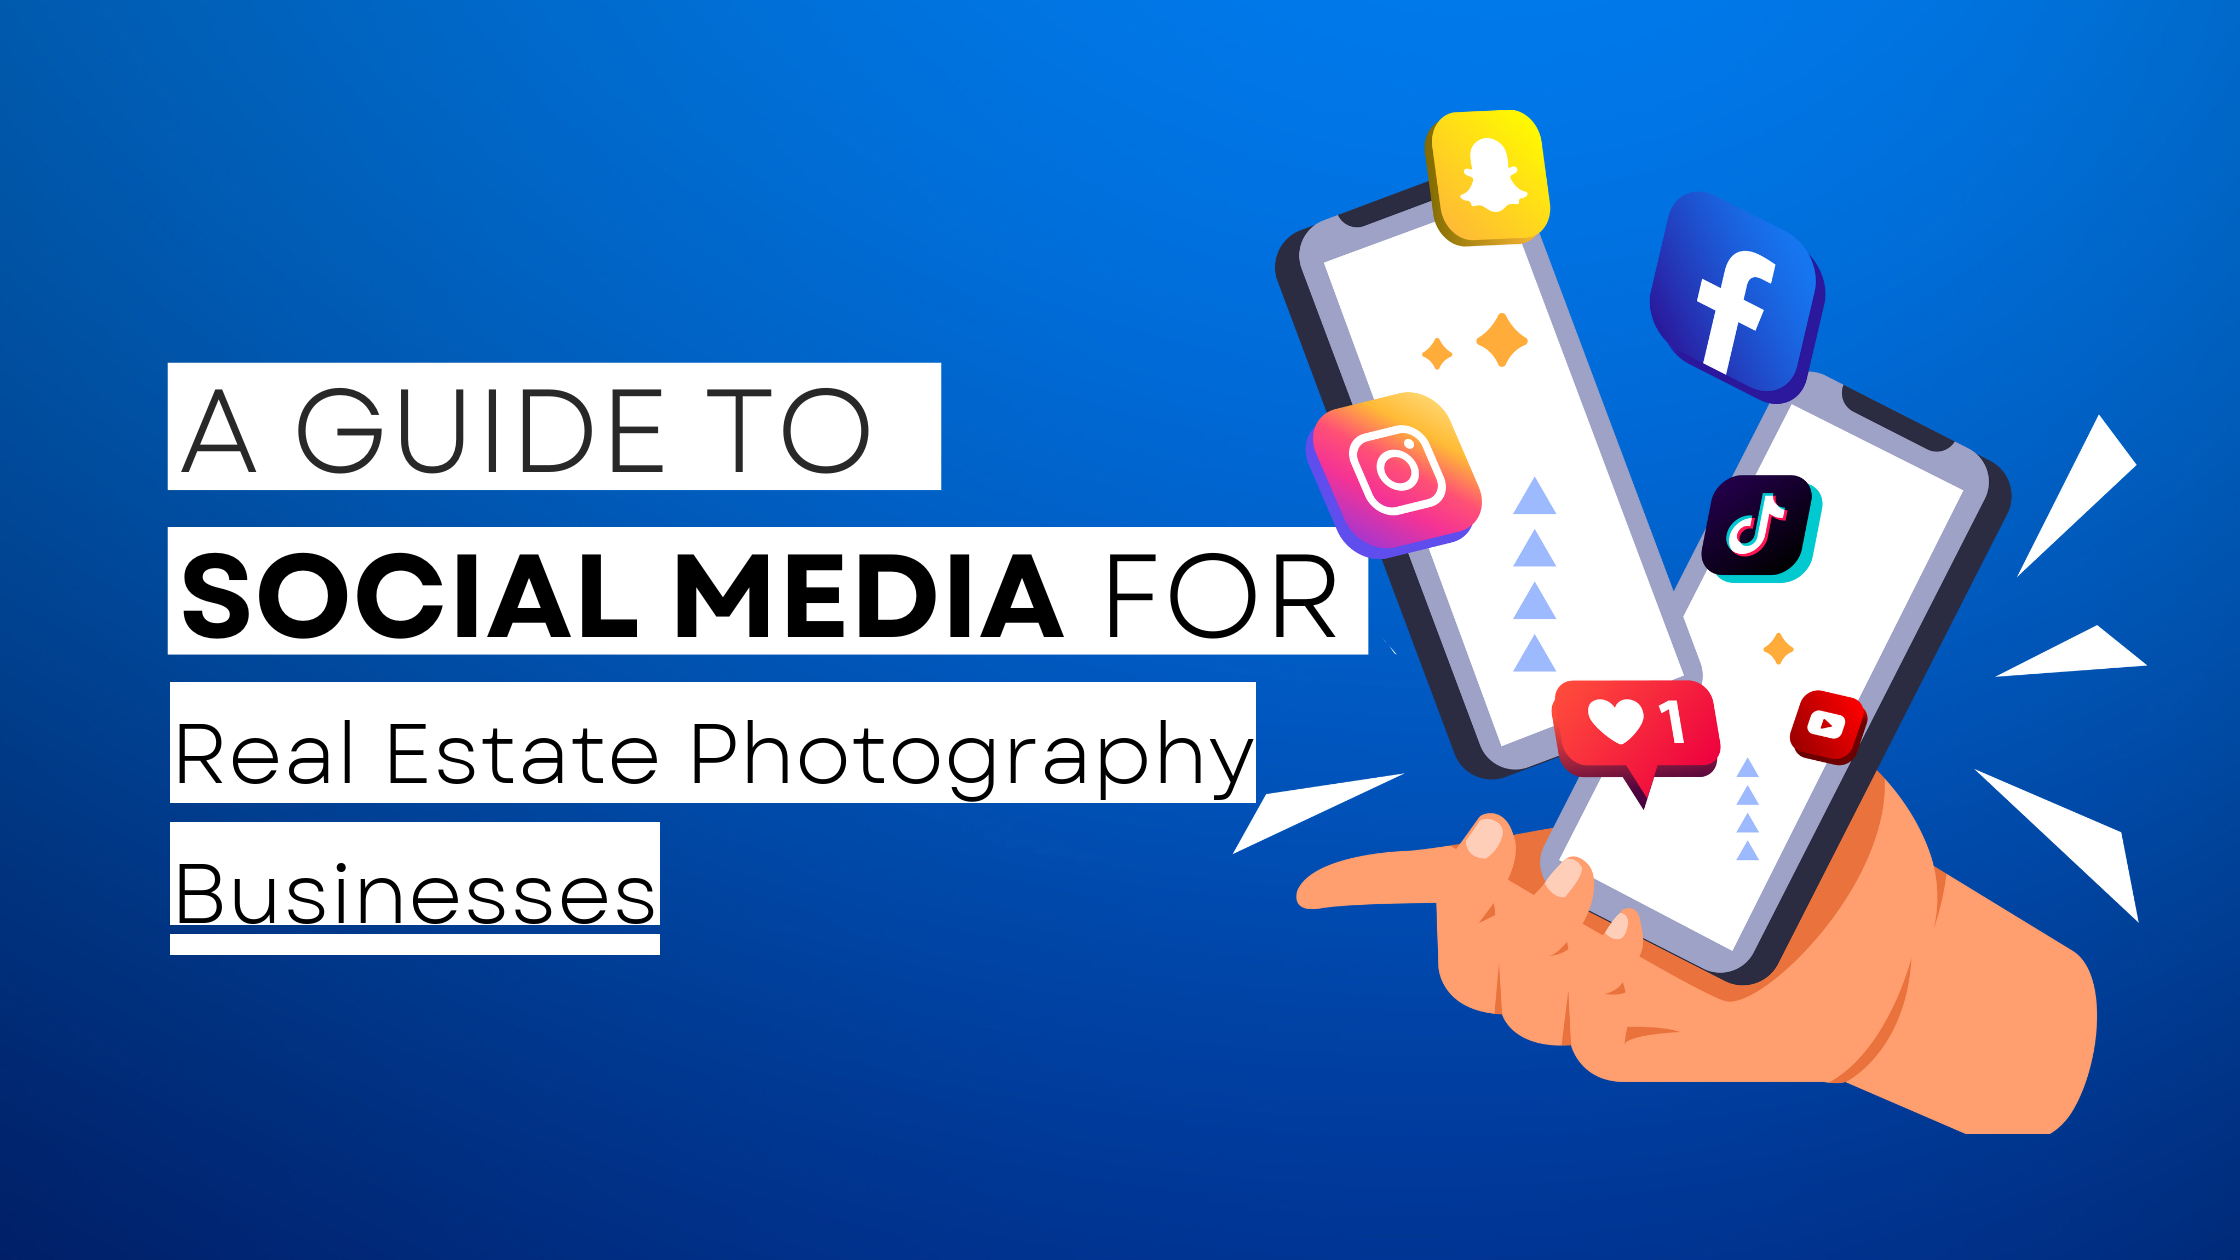 How to start Real Estate Photography  on social media